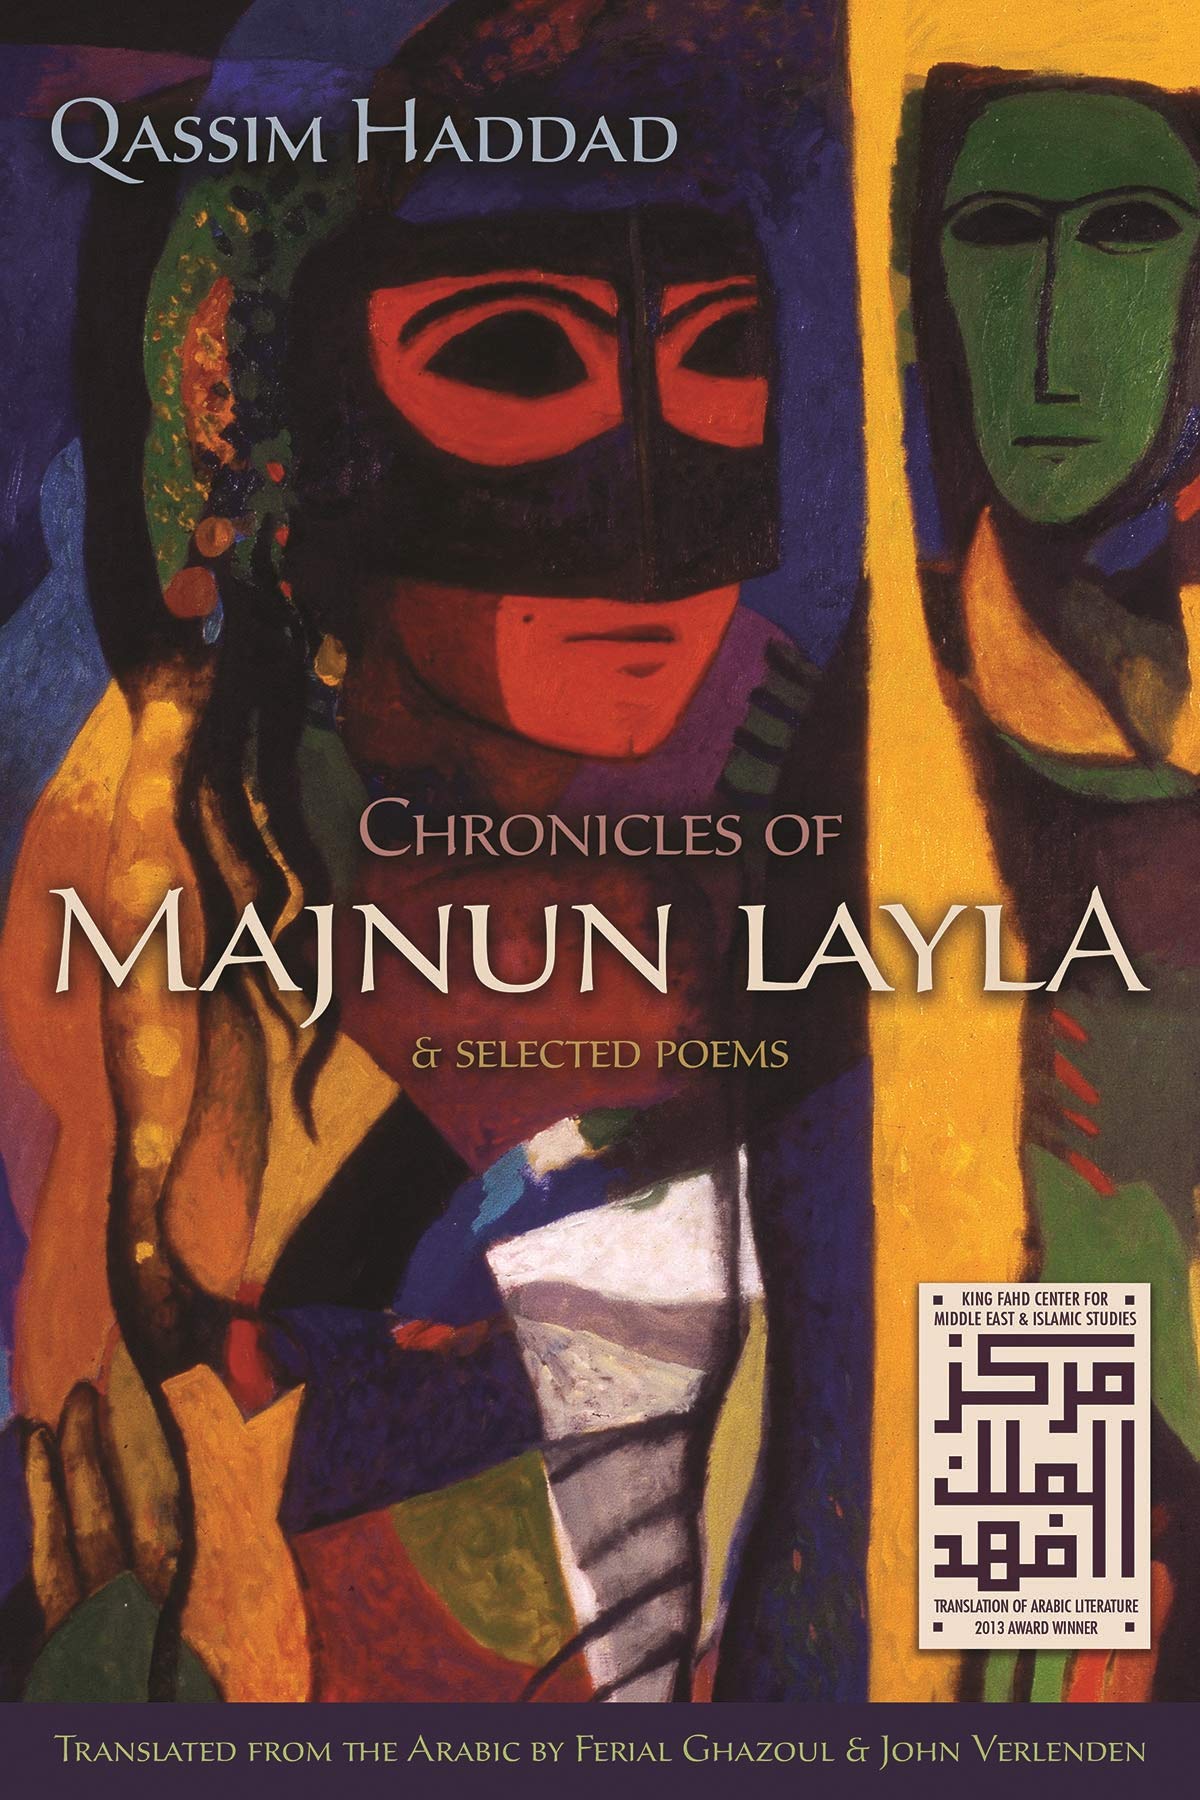 Chronicles of Majnun Layla and Selected Poems (Middle East Literature In Translation) Paperback – September 24, 2014